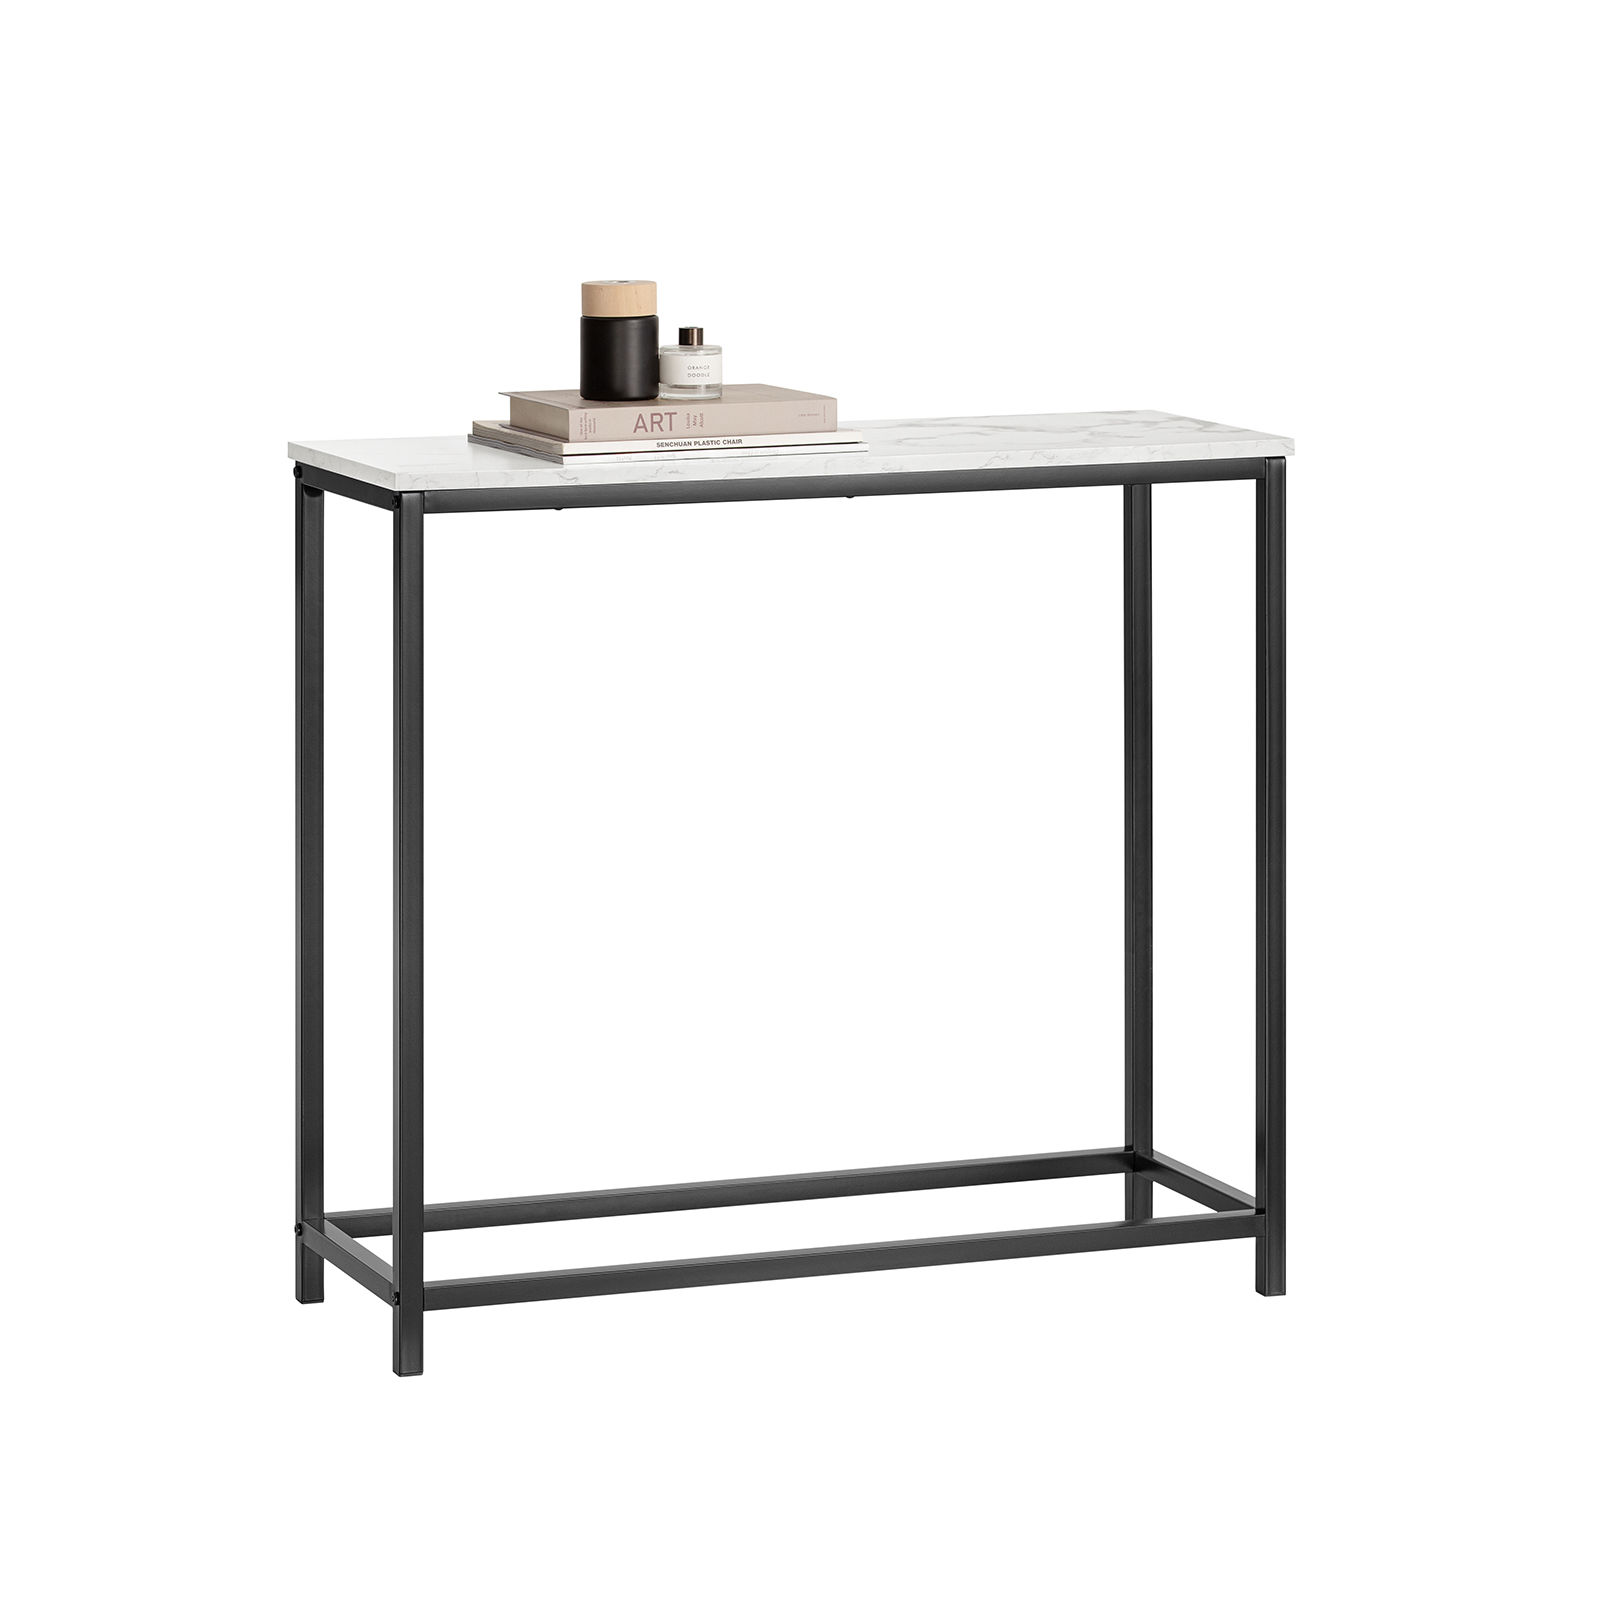 SoBuy FSB29-SCH, Console Table Side Table End Table Hall Table Living Room Table